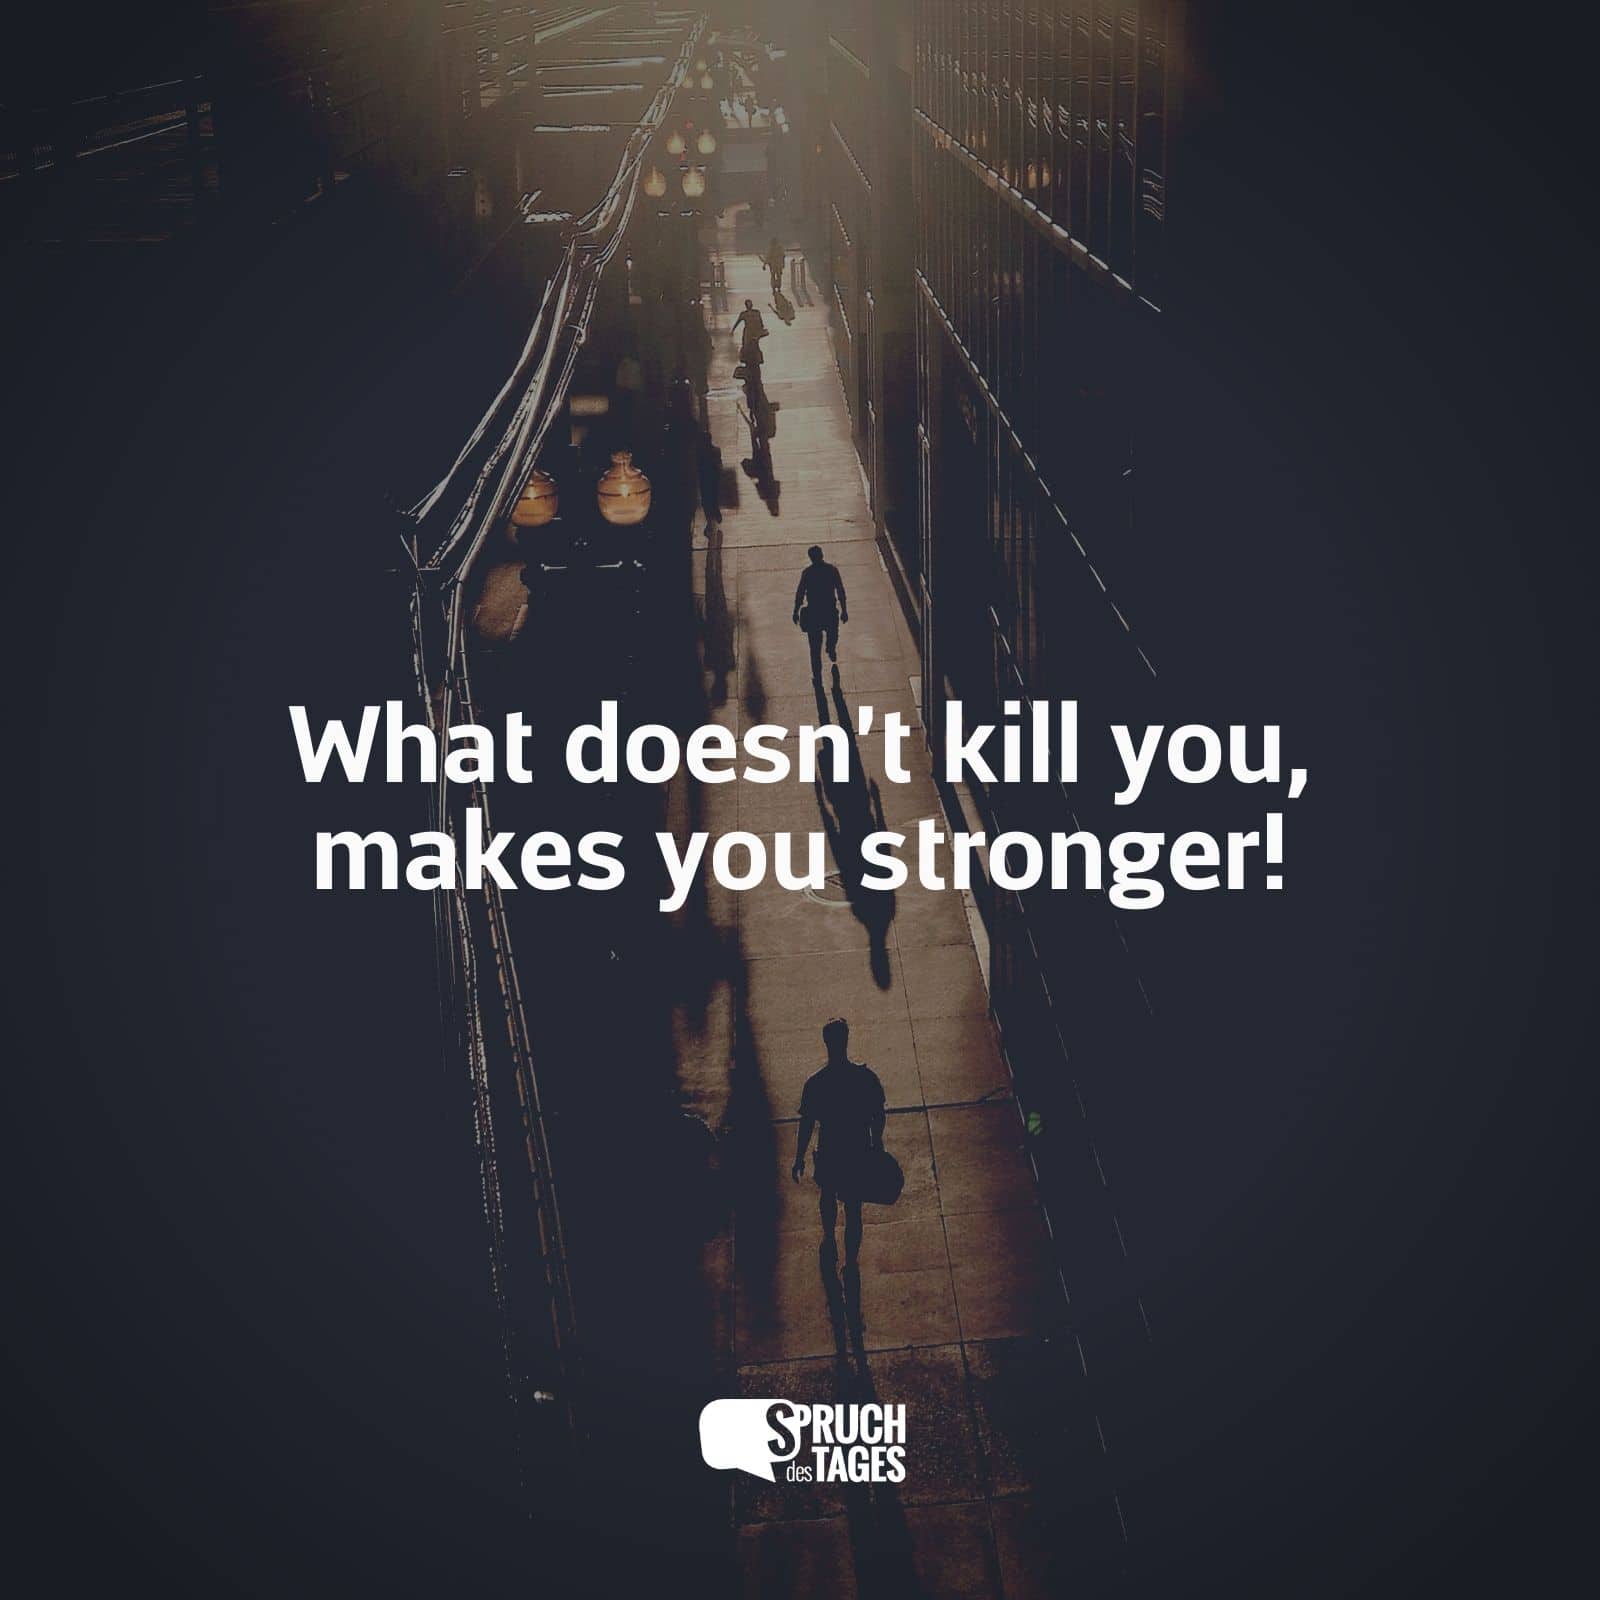 What doesn't kill you, makes you stronger!